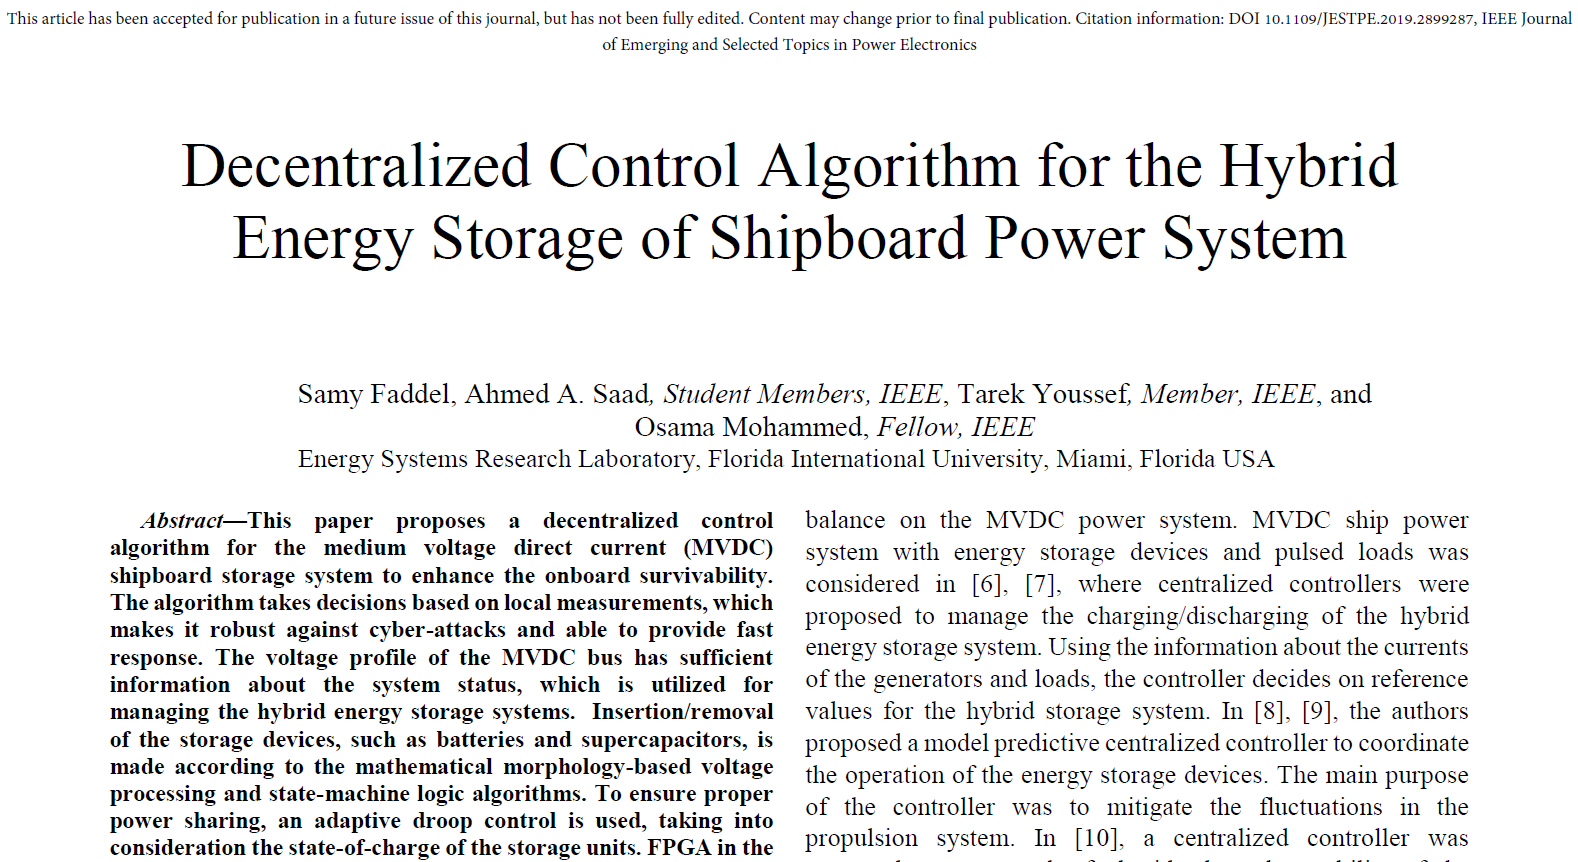 Decentralized Control Algorithm for the Hybrid Energy Storage of Shipboard Power System